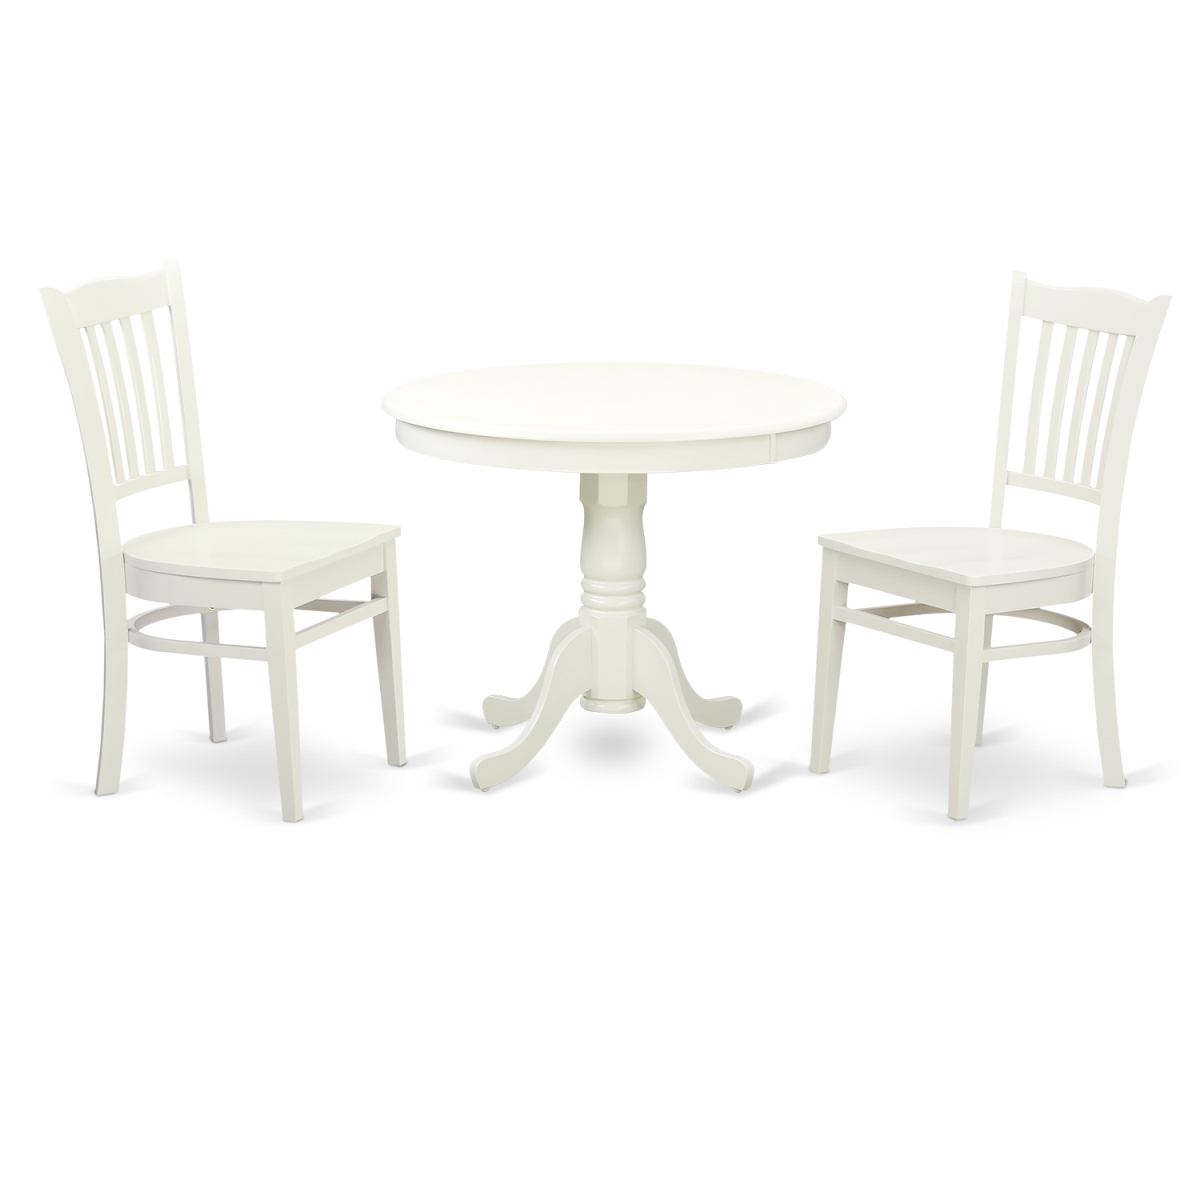 Picture of East West Furniture ANGR3-LWH-W Dining Set - One Table & 2 Solid Wood Seat Chairs, Linen White - 3 Piece